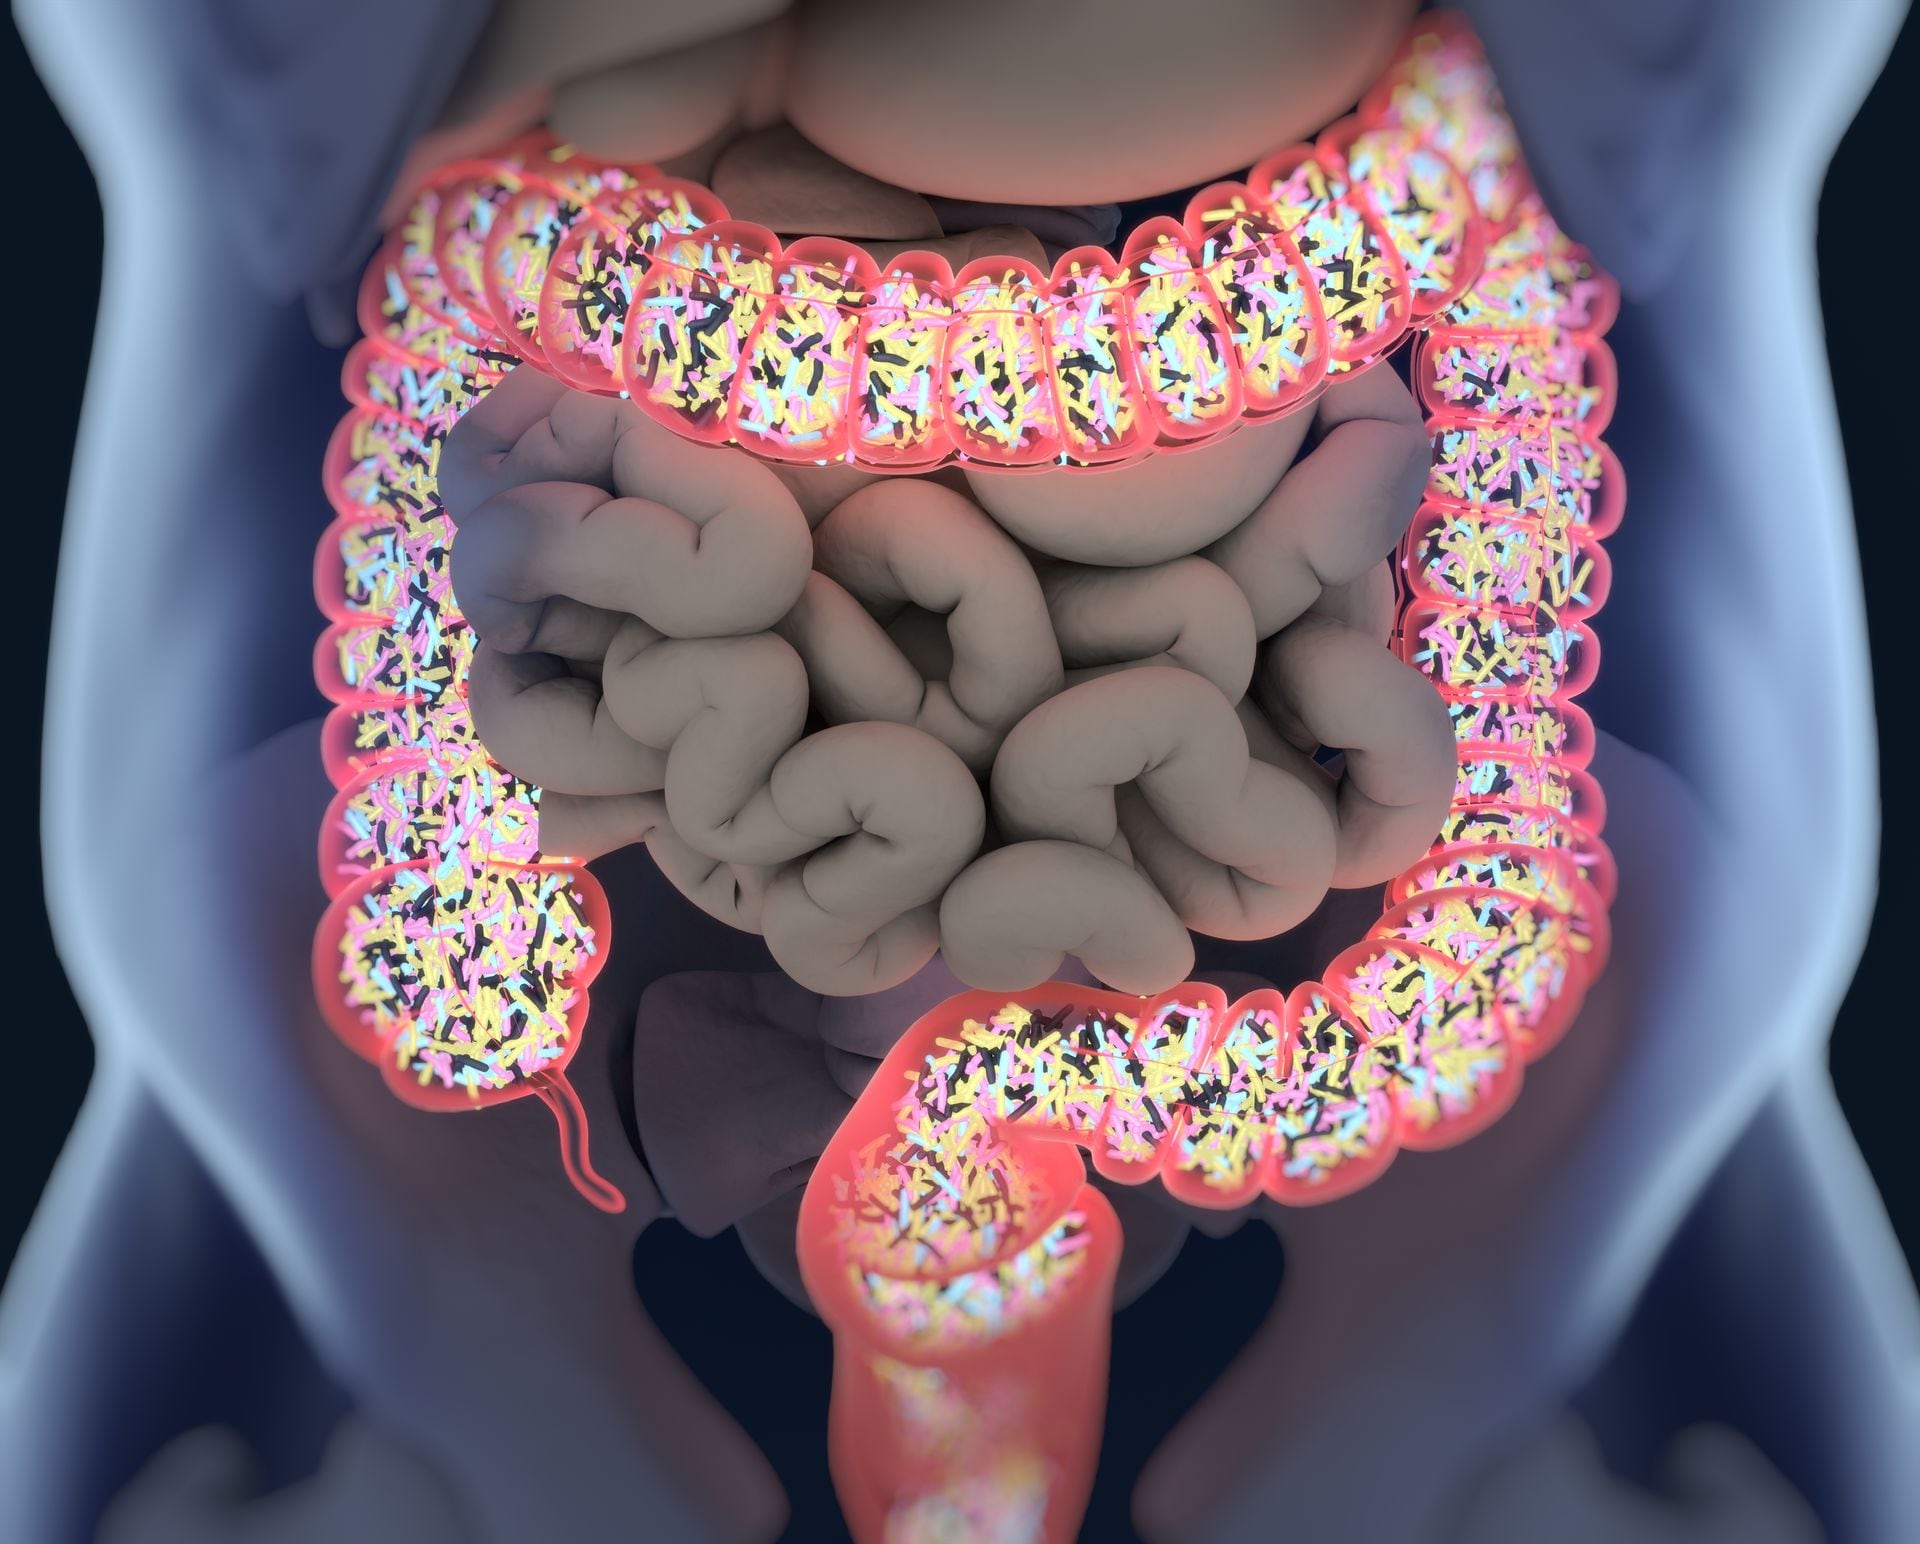 Probiotics are food for the gut flora.